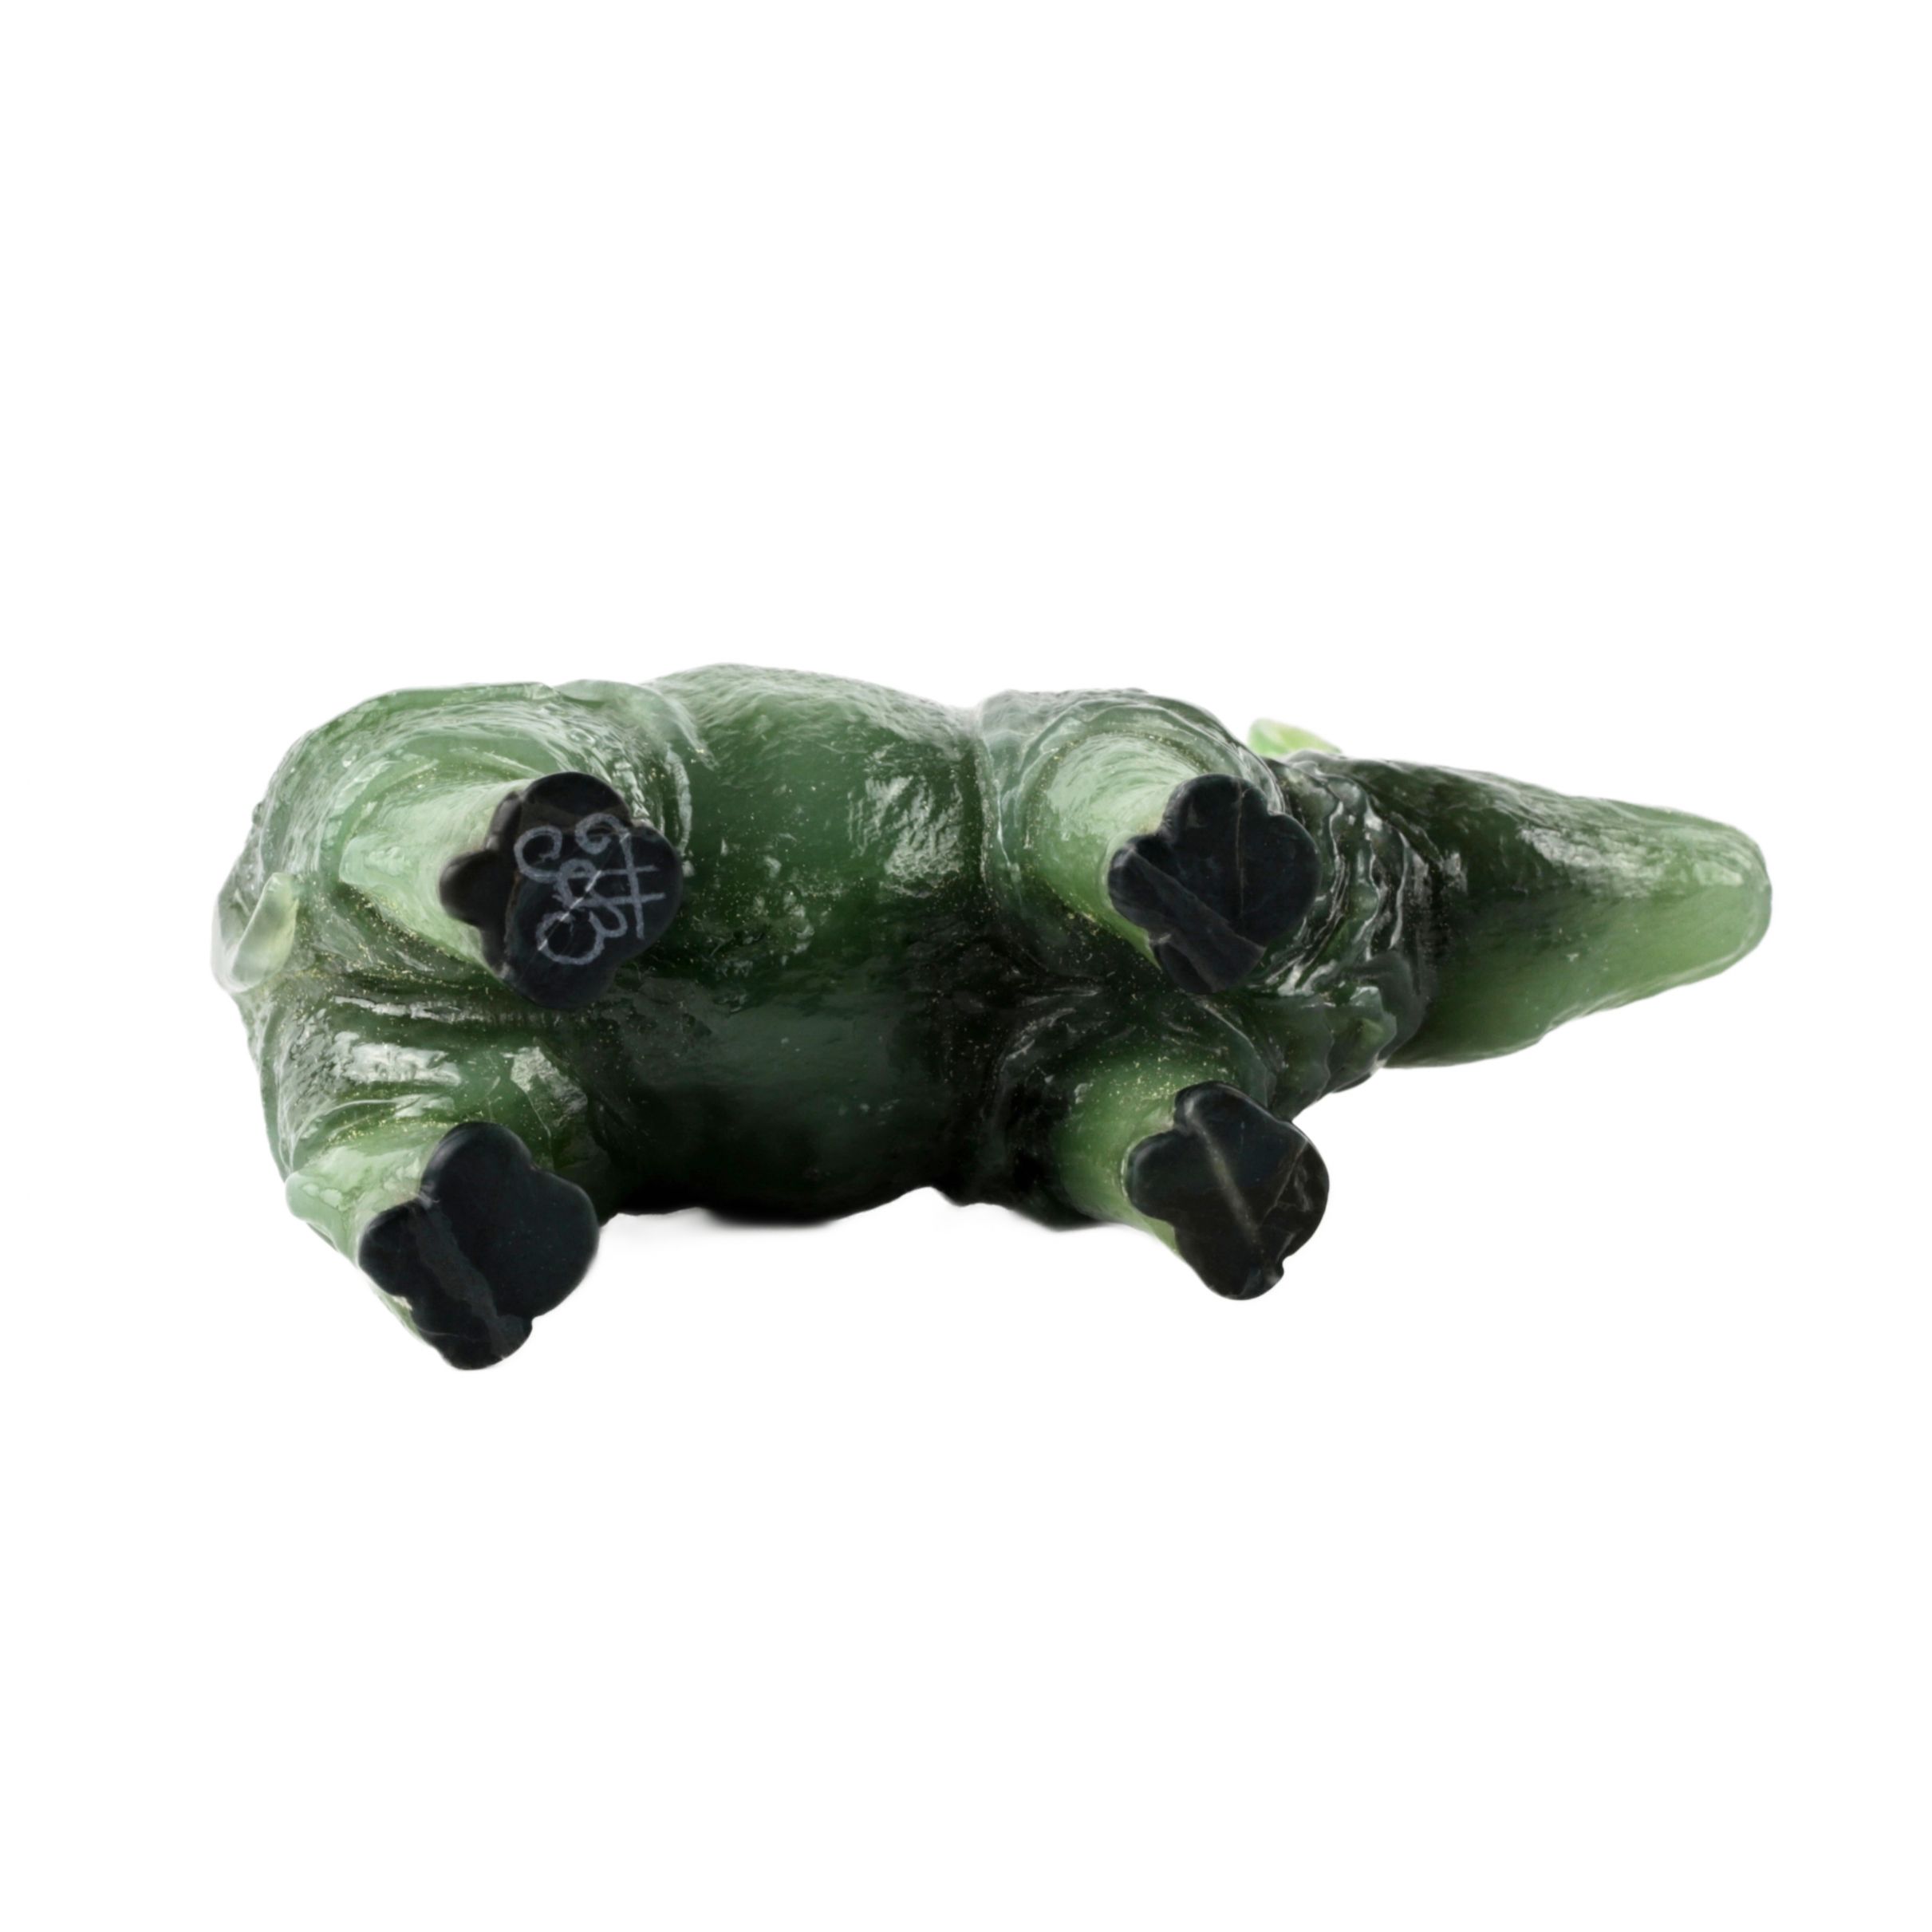 Stone-cutting miniature Jade rhinoceros in the style of products from the Faberge firm - Image 5 of 5